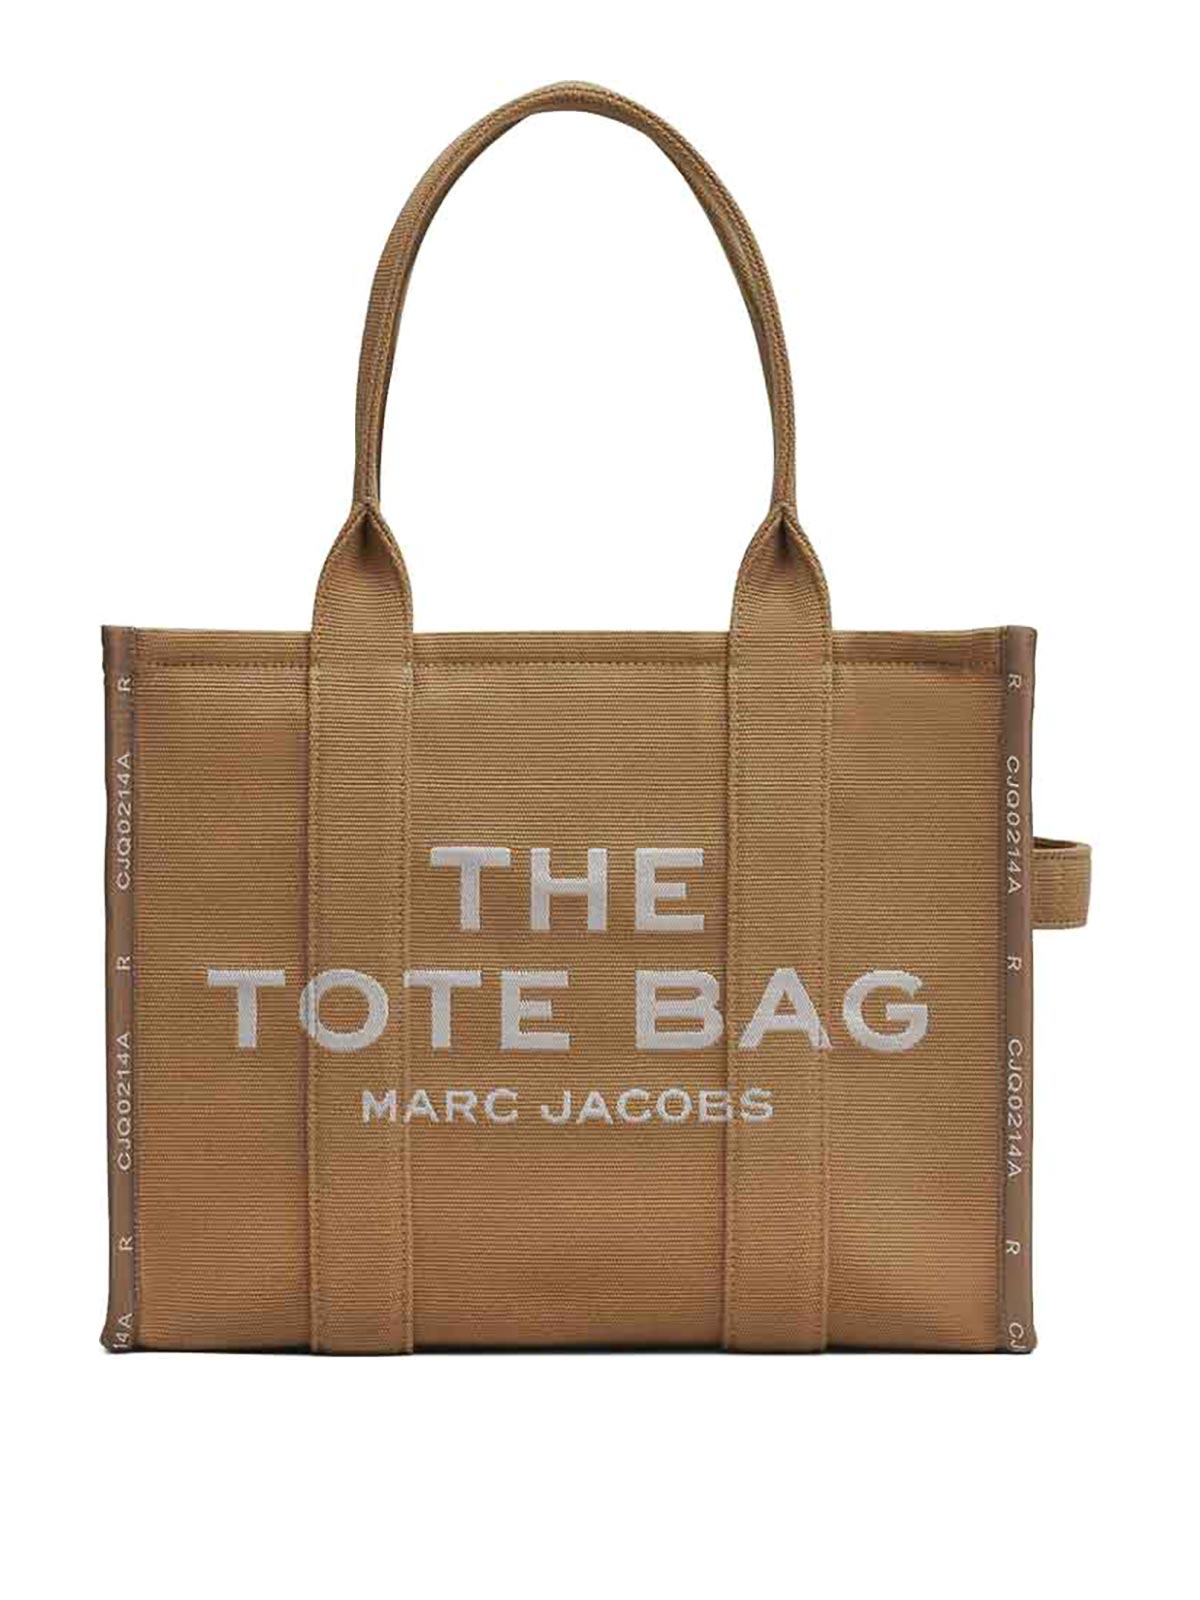 MARC JACOBS LARGE BROWN JACQUARD TOTE